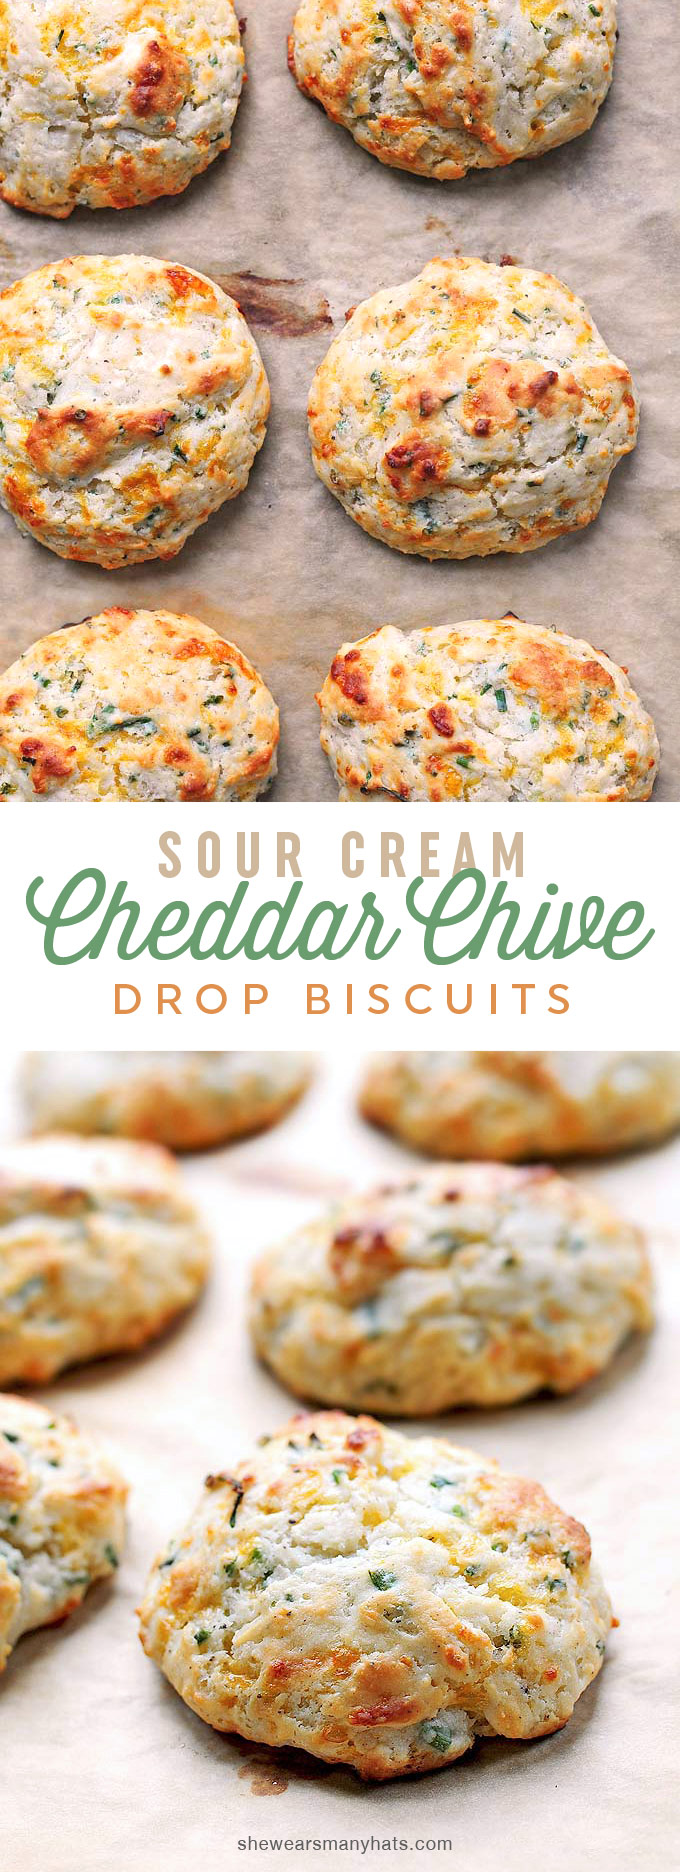 Easy Sour Cream Cheddar Chive Drop Biscuits Recipe | shewearsmanyhats.com